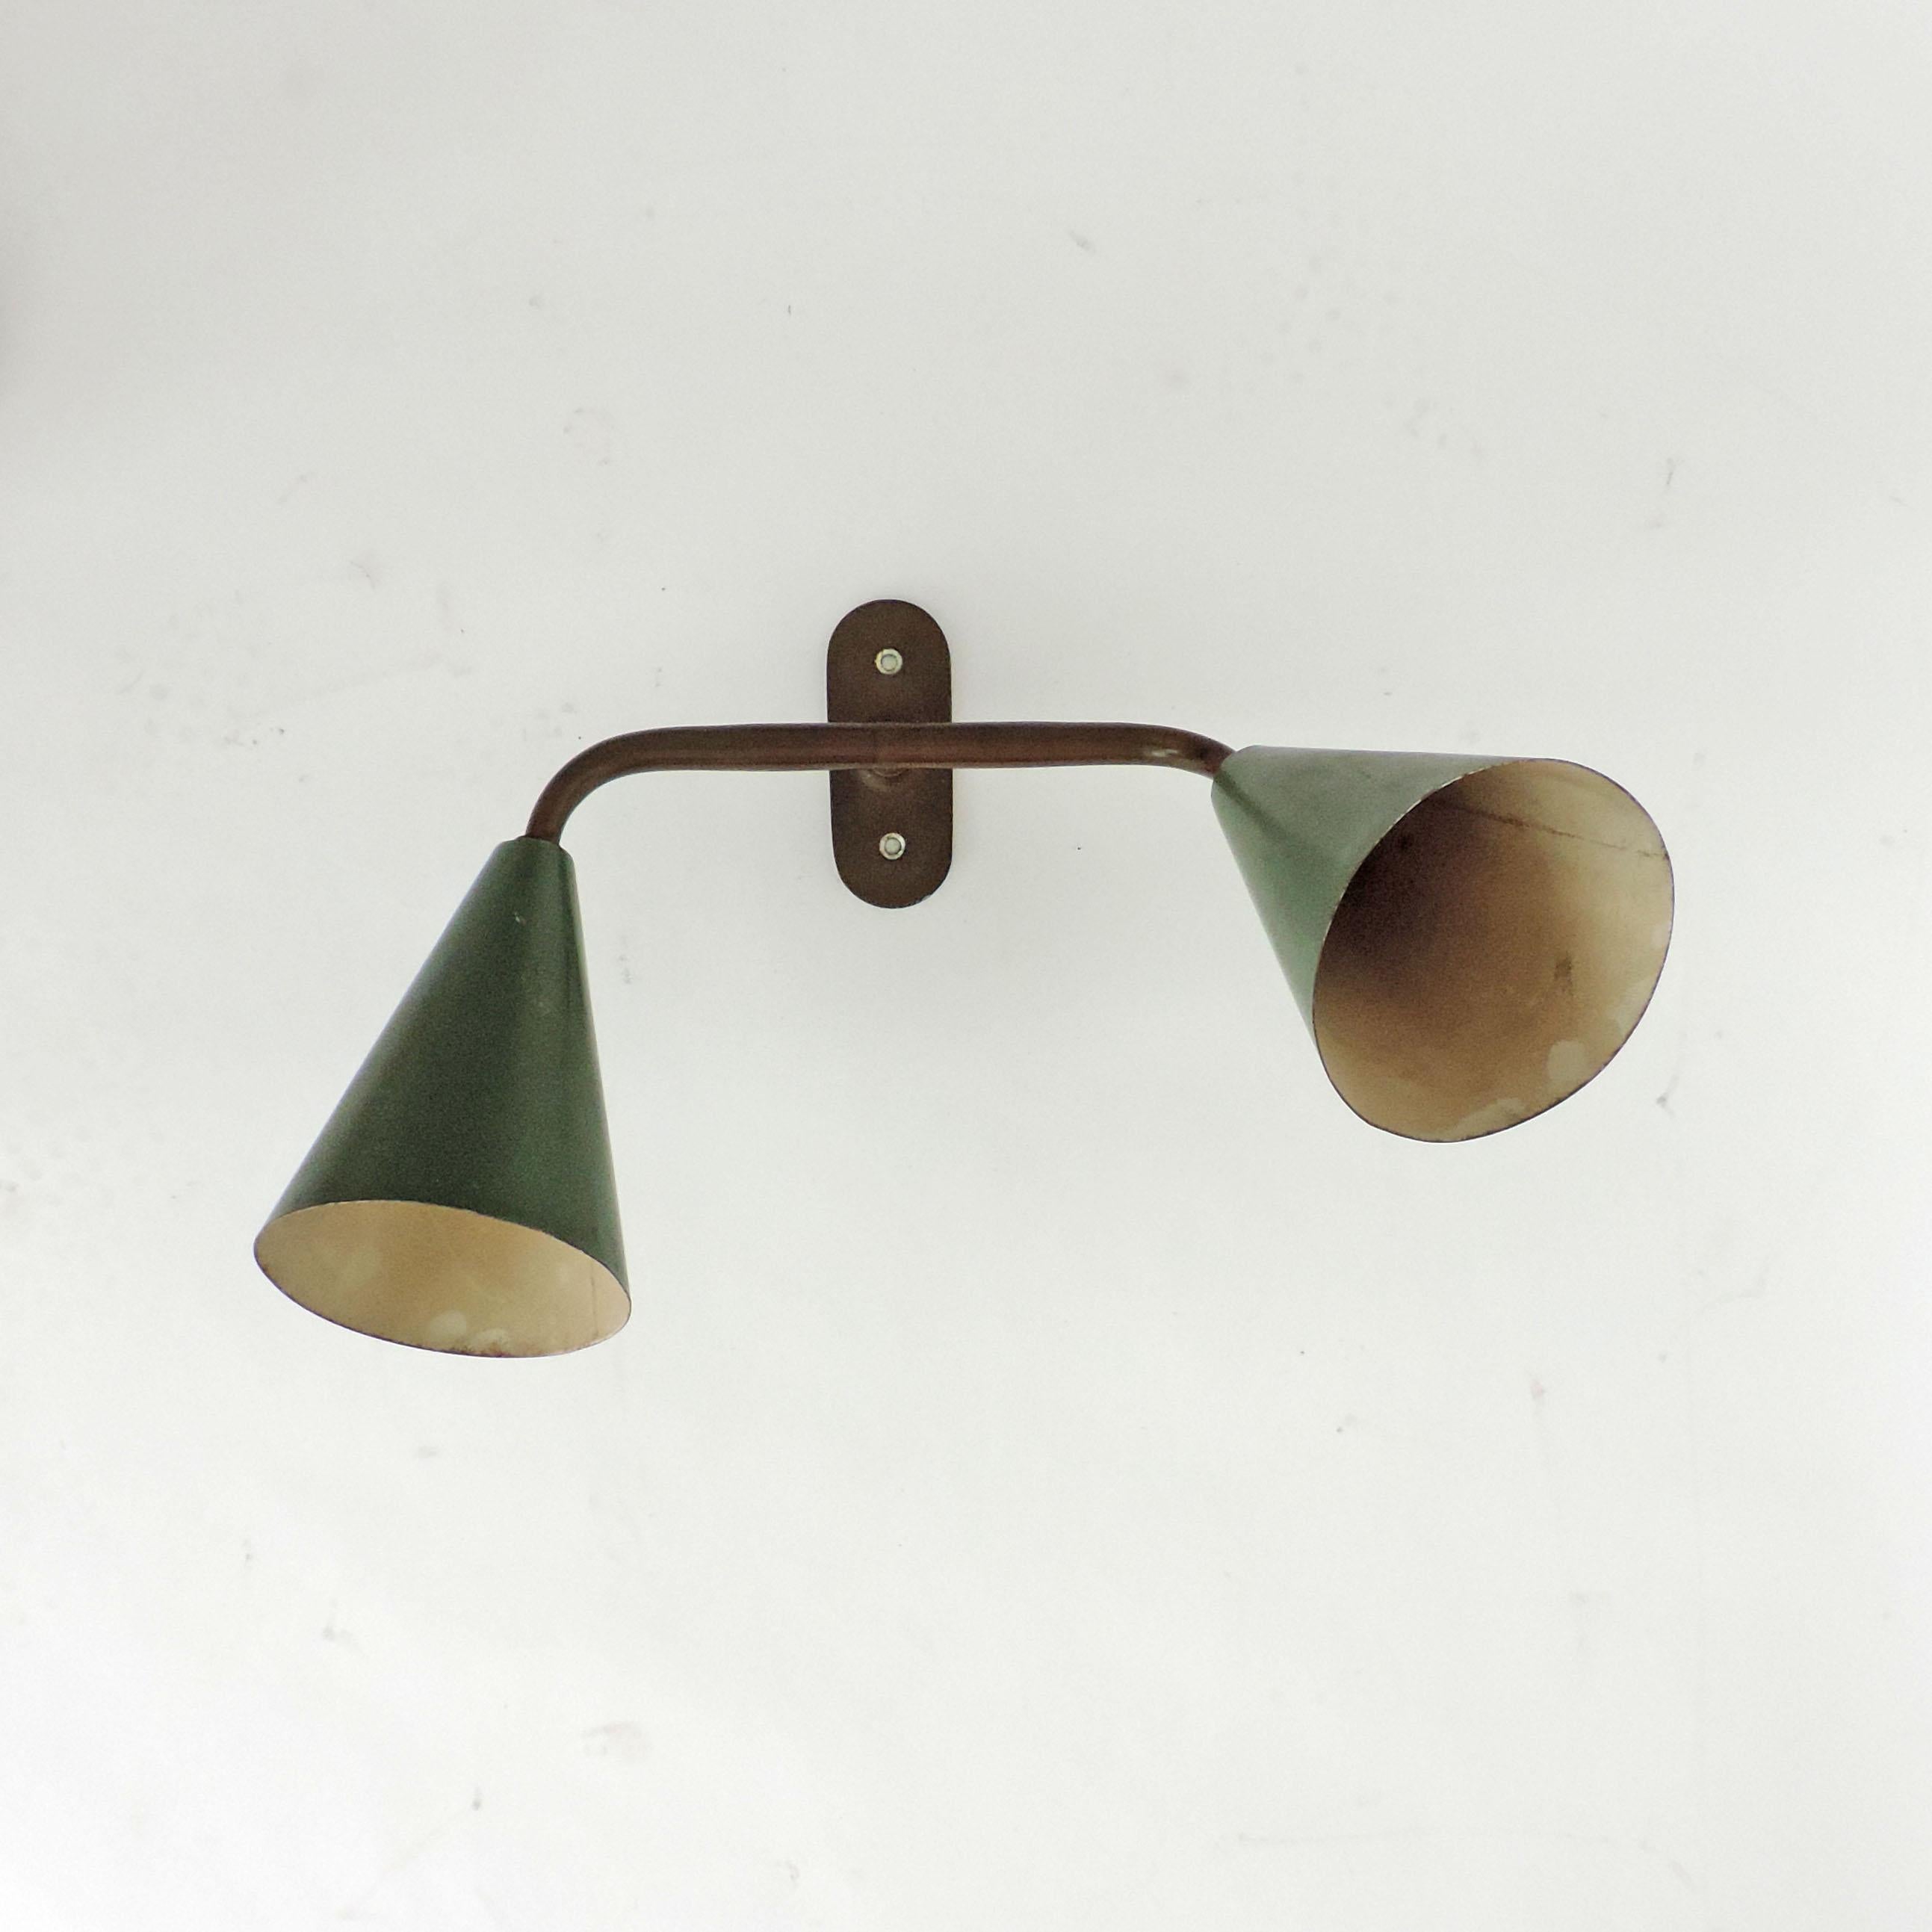 Italian Architect 1940s Double Cone Wall Lamp in Burnished Brass and Green painted Metal.